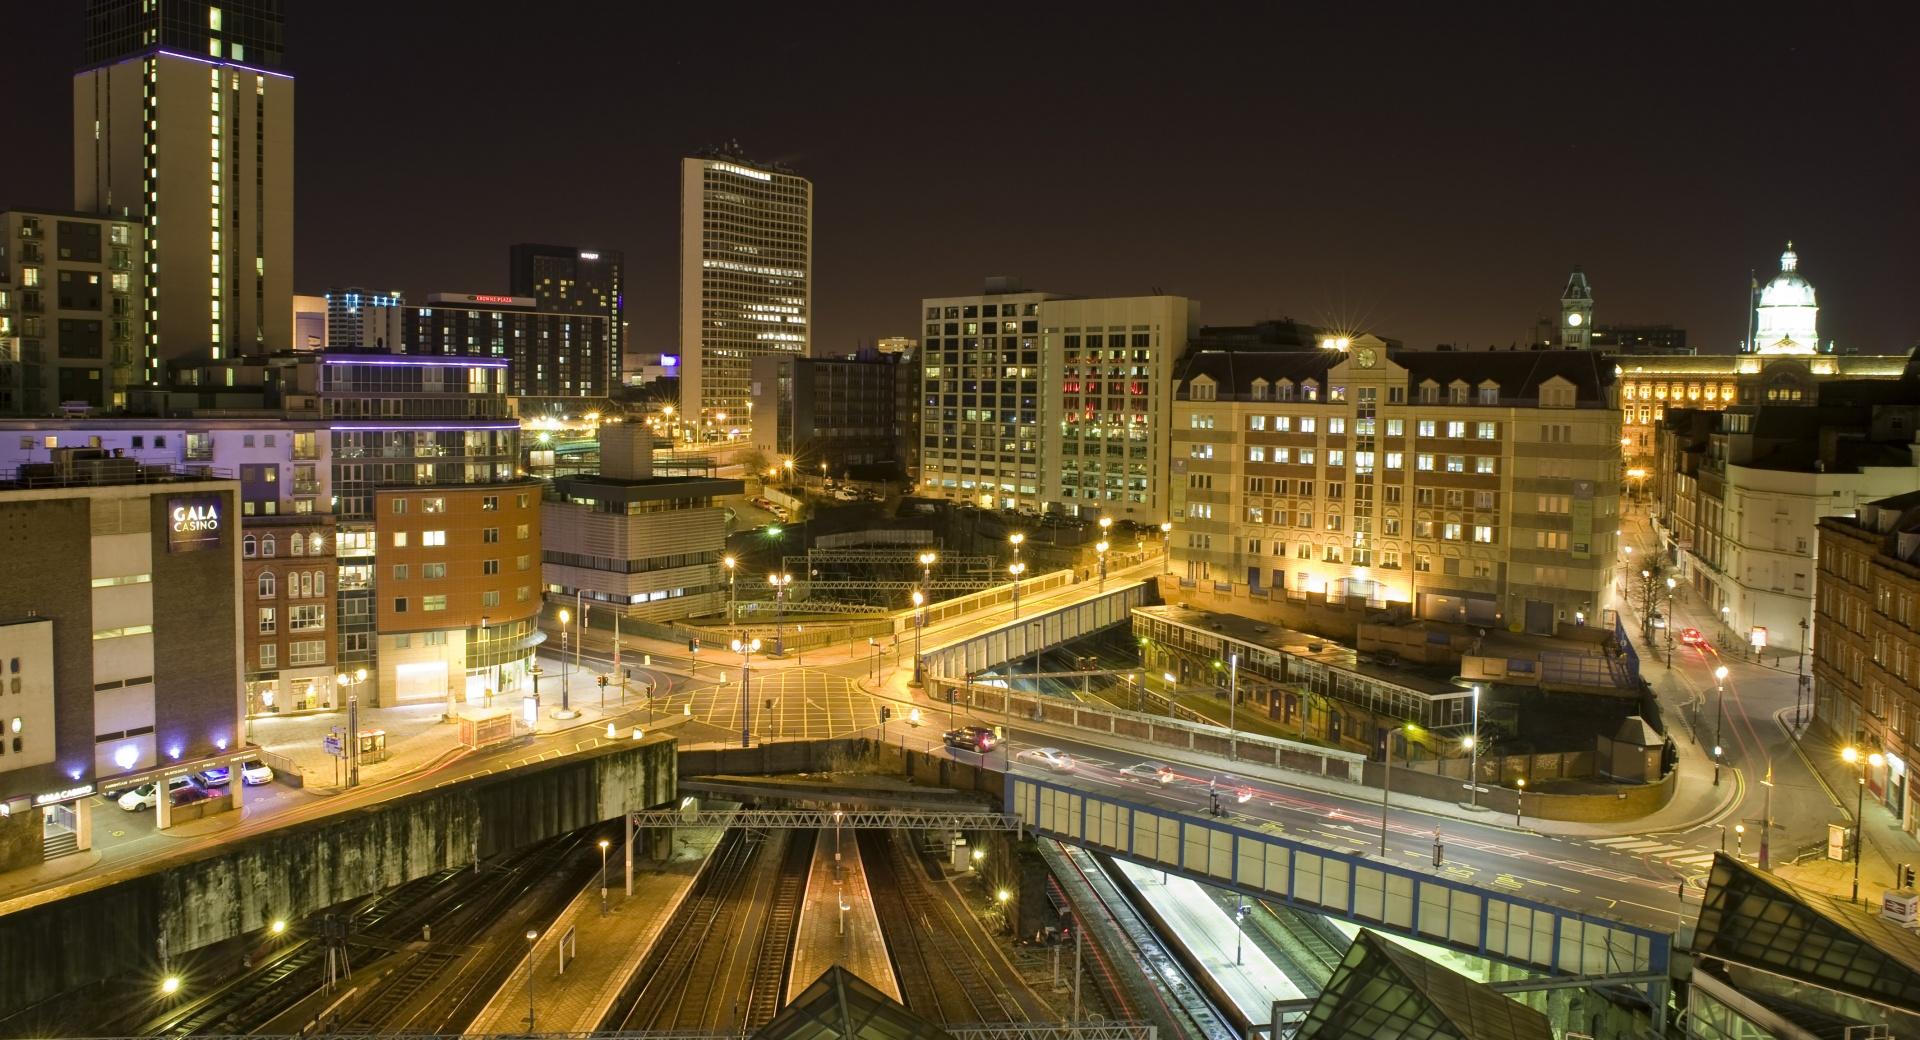 A Night In Birmingham wallpapers HD quality